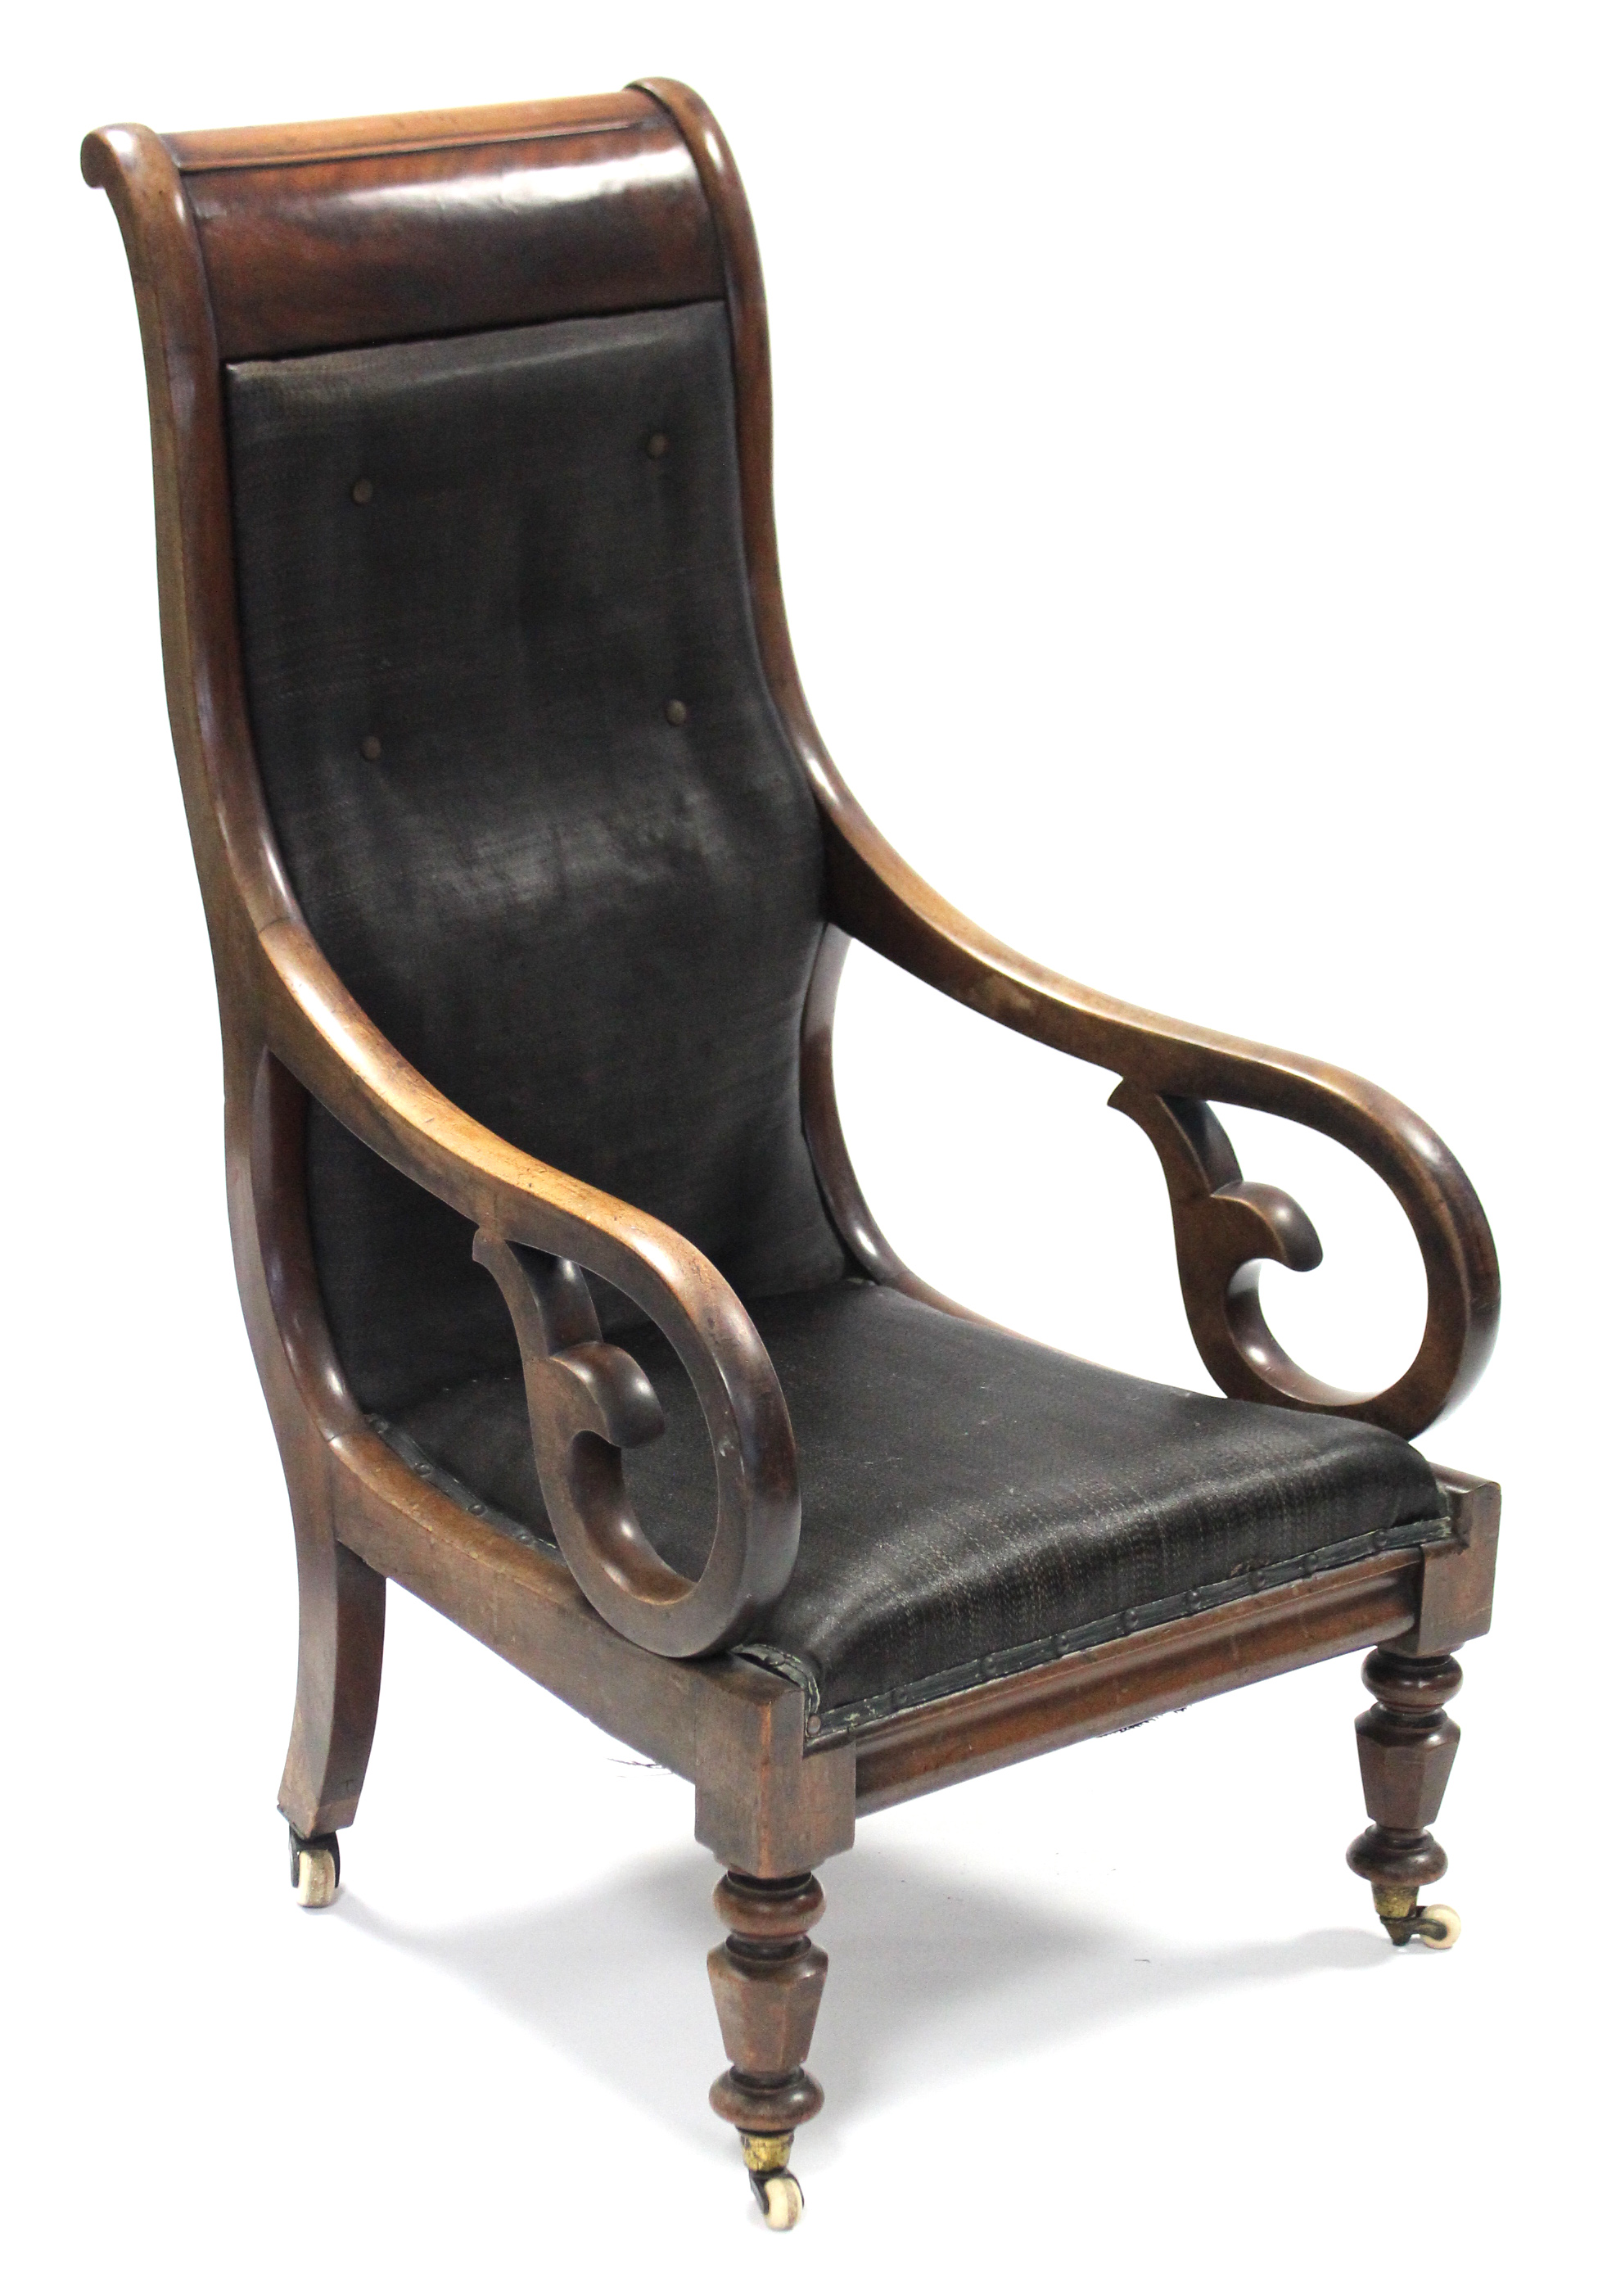 A William IV mahogany library armchair, with open scroll arms, padded seat & tall buttoned-back